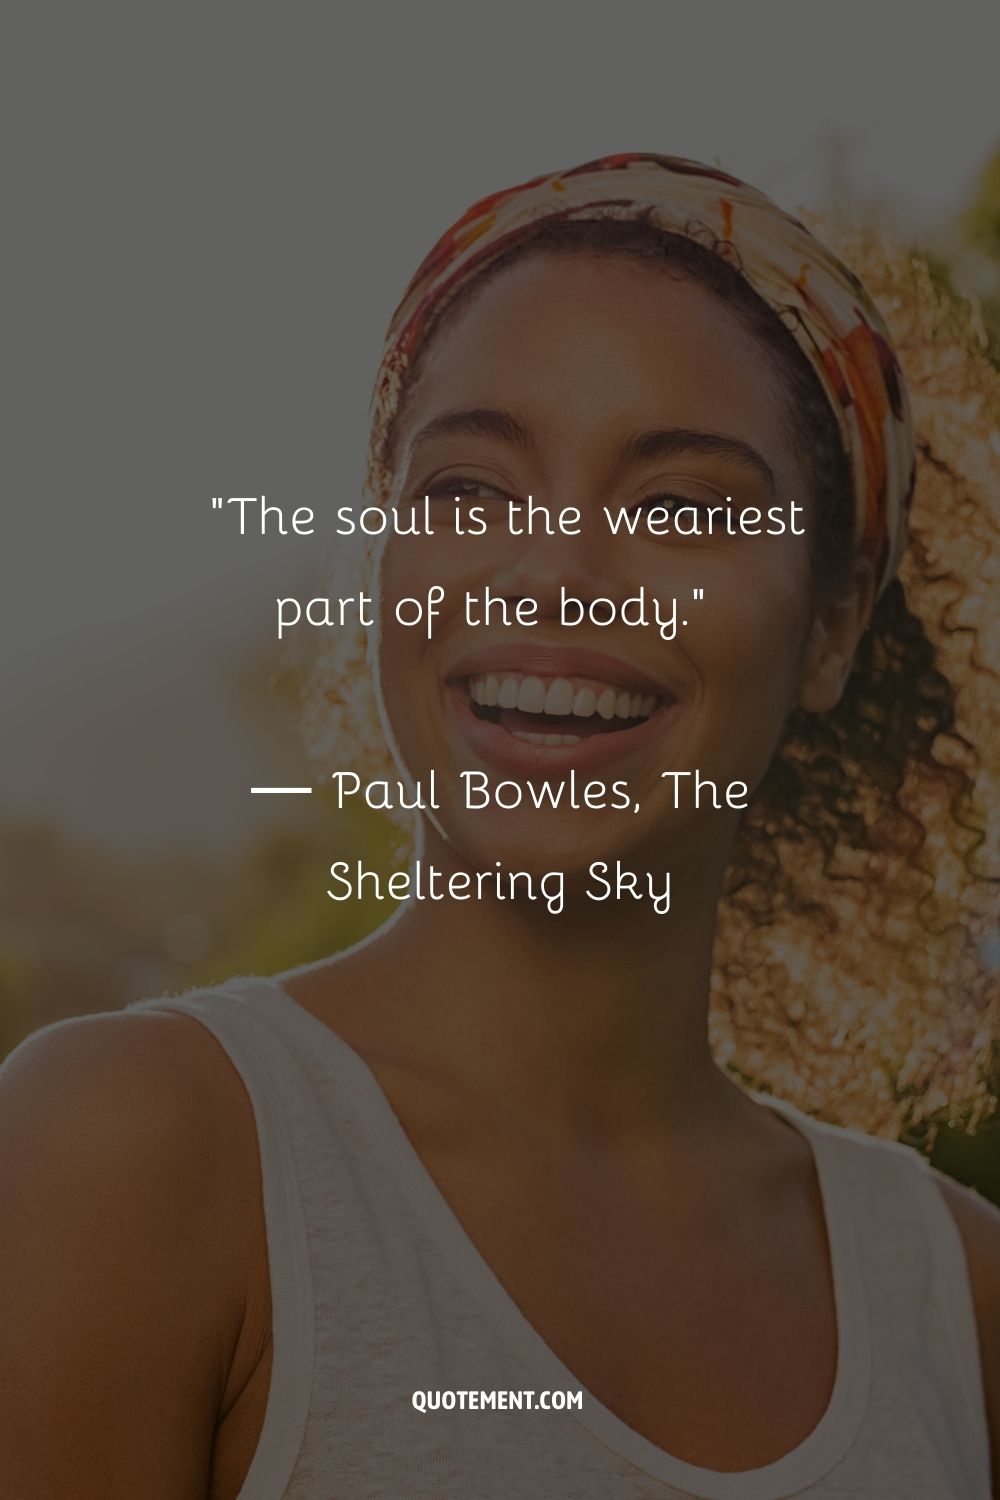 The soul is the weariest part of the body.